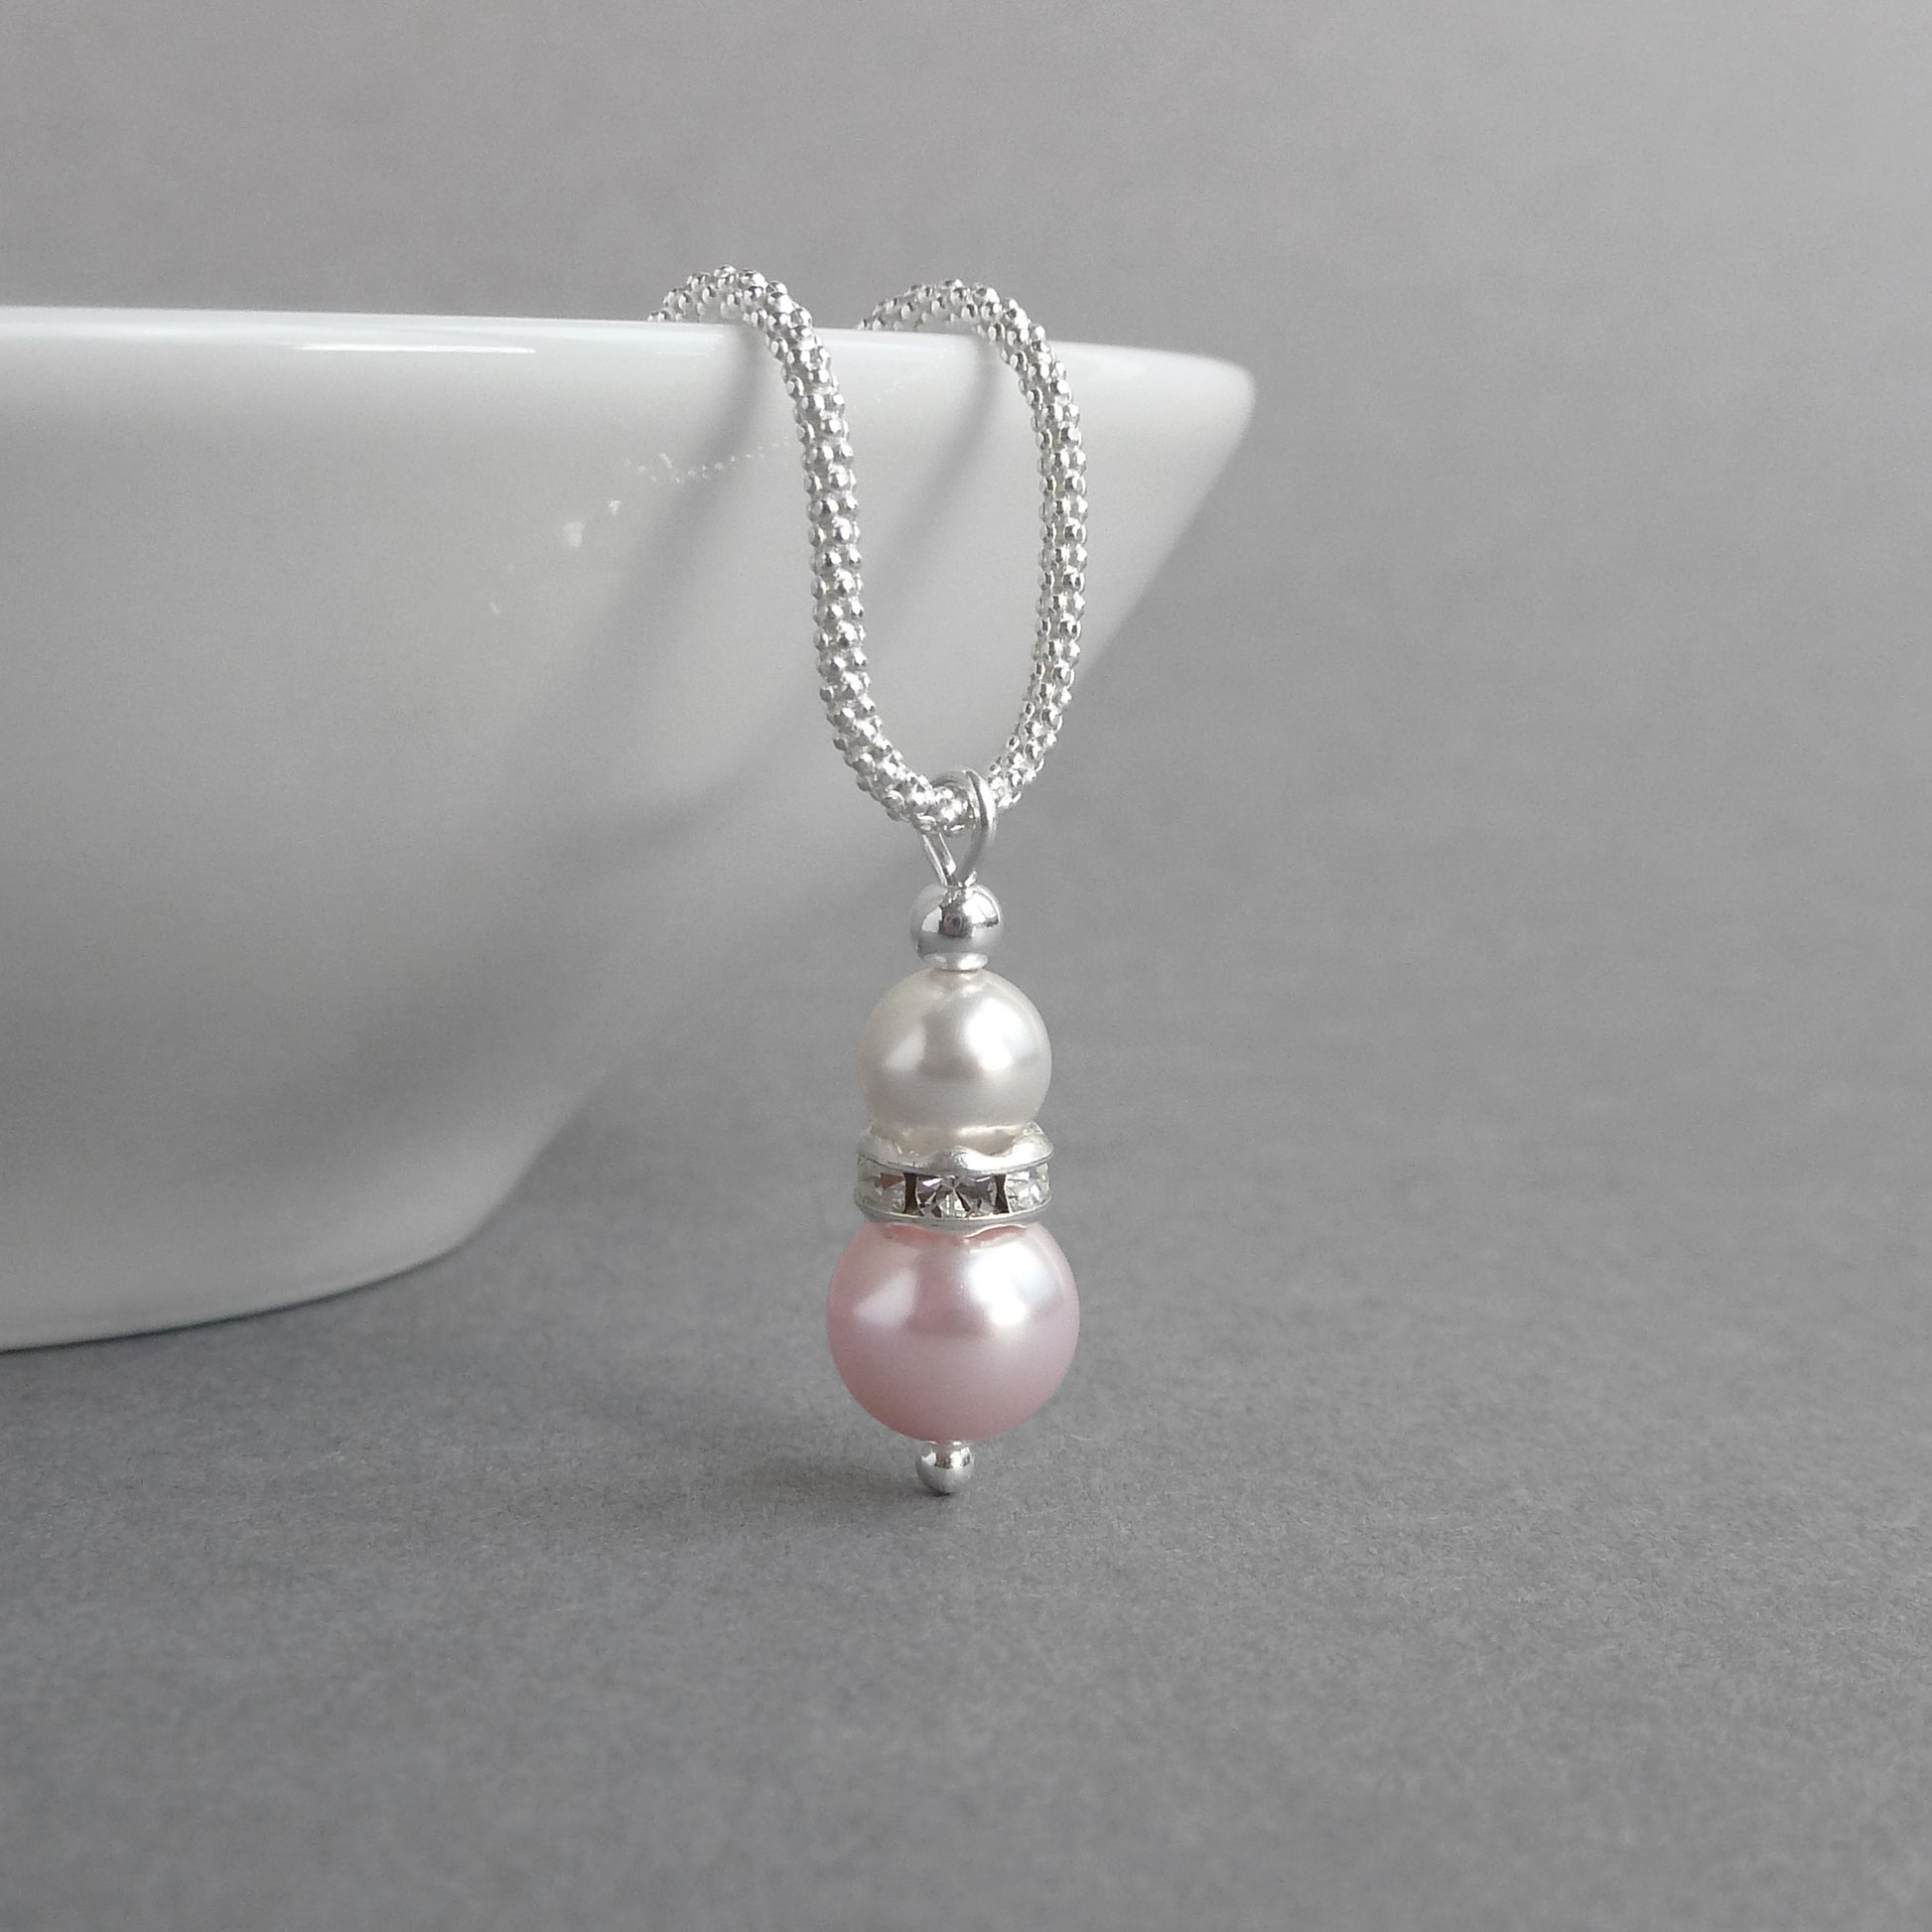 Blush pink pearl and crystal necklace